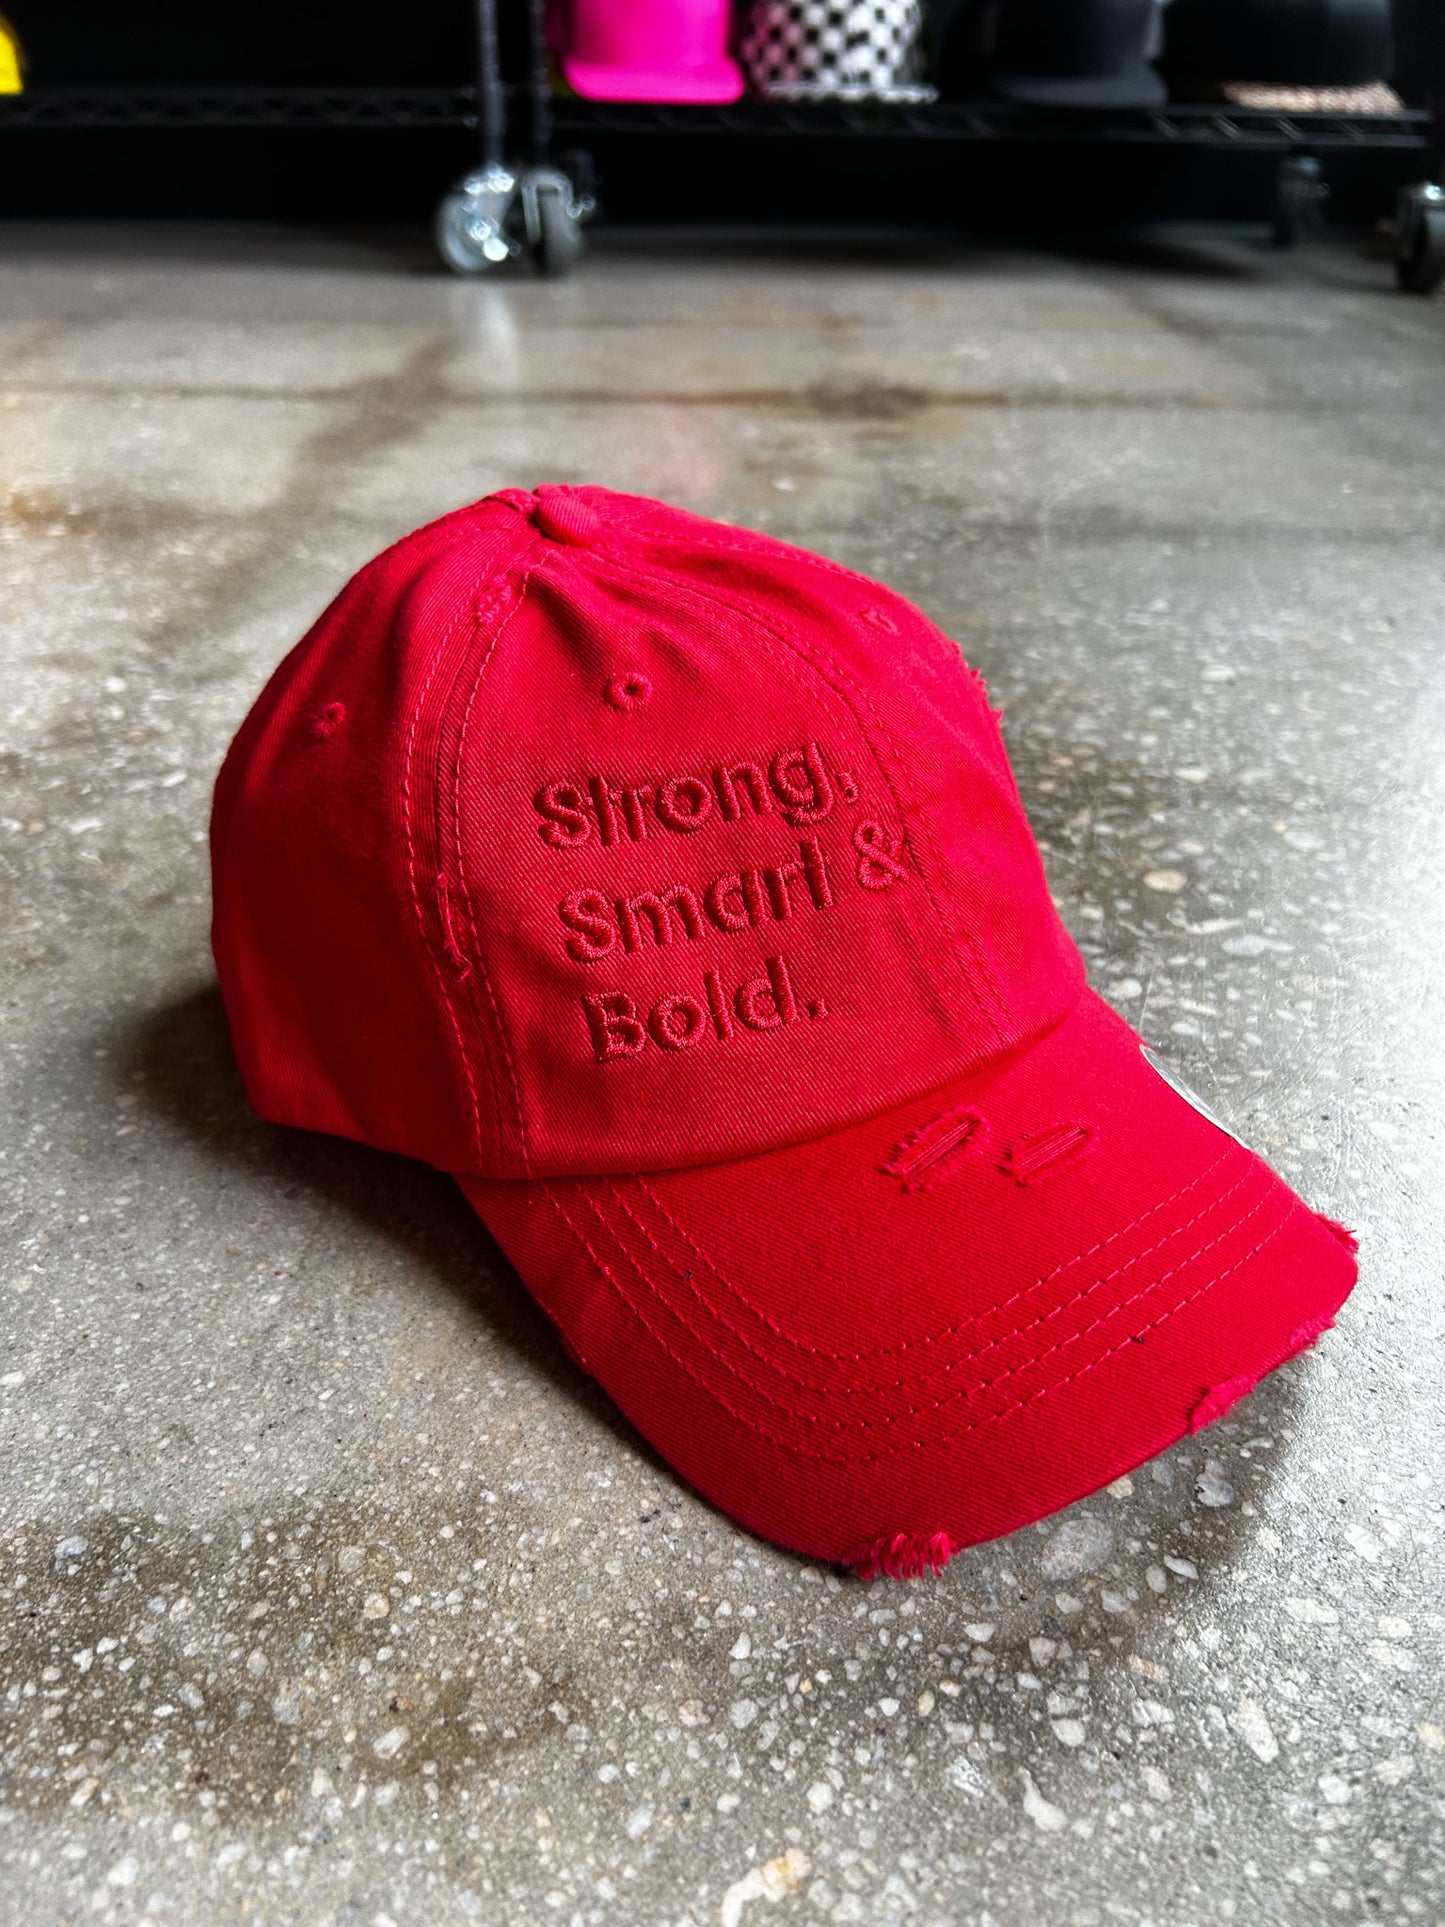 Strong, Smart & Bold Hat (Distressed)